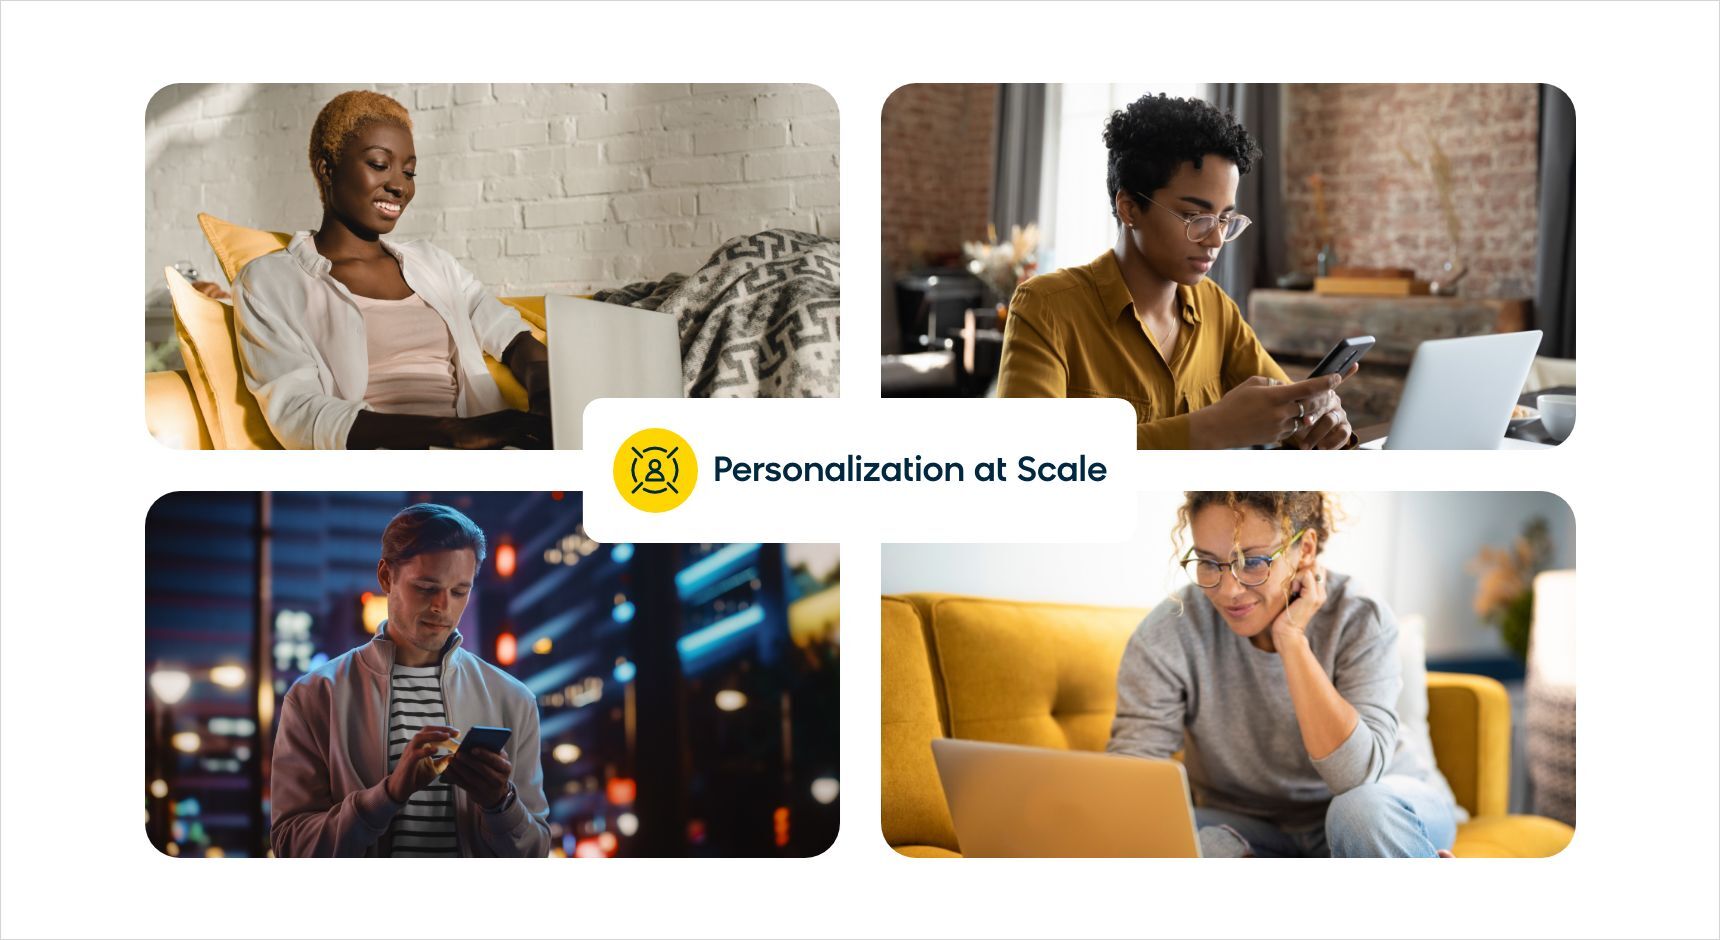 Personalization at scale will help your marketing teams find success.